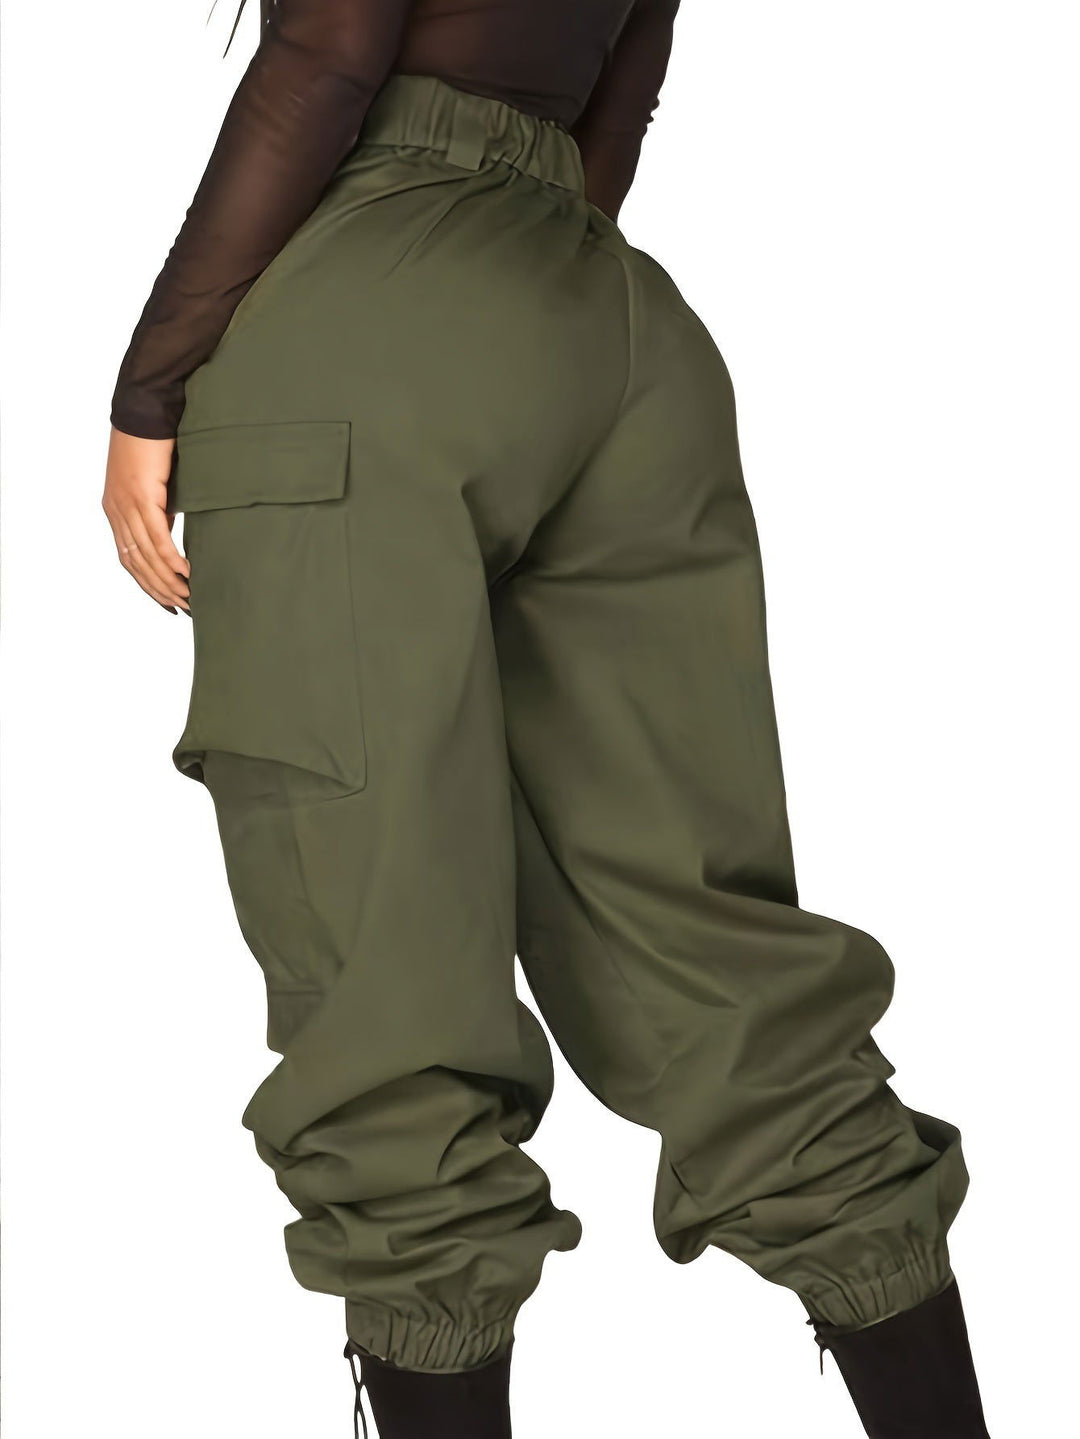 Perfect Fit Plus Size Button Front Baggy High Waist Cargo Pants - Gen U Us Products -  